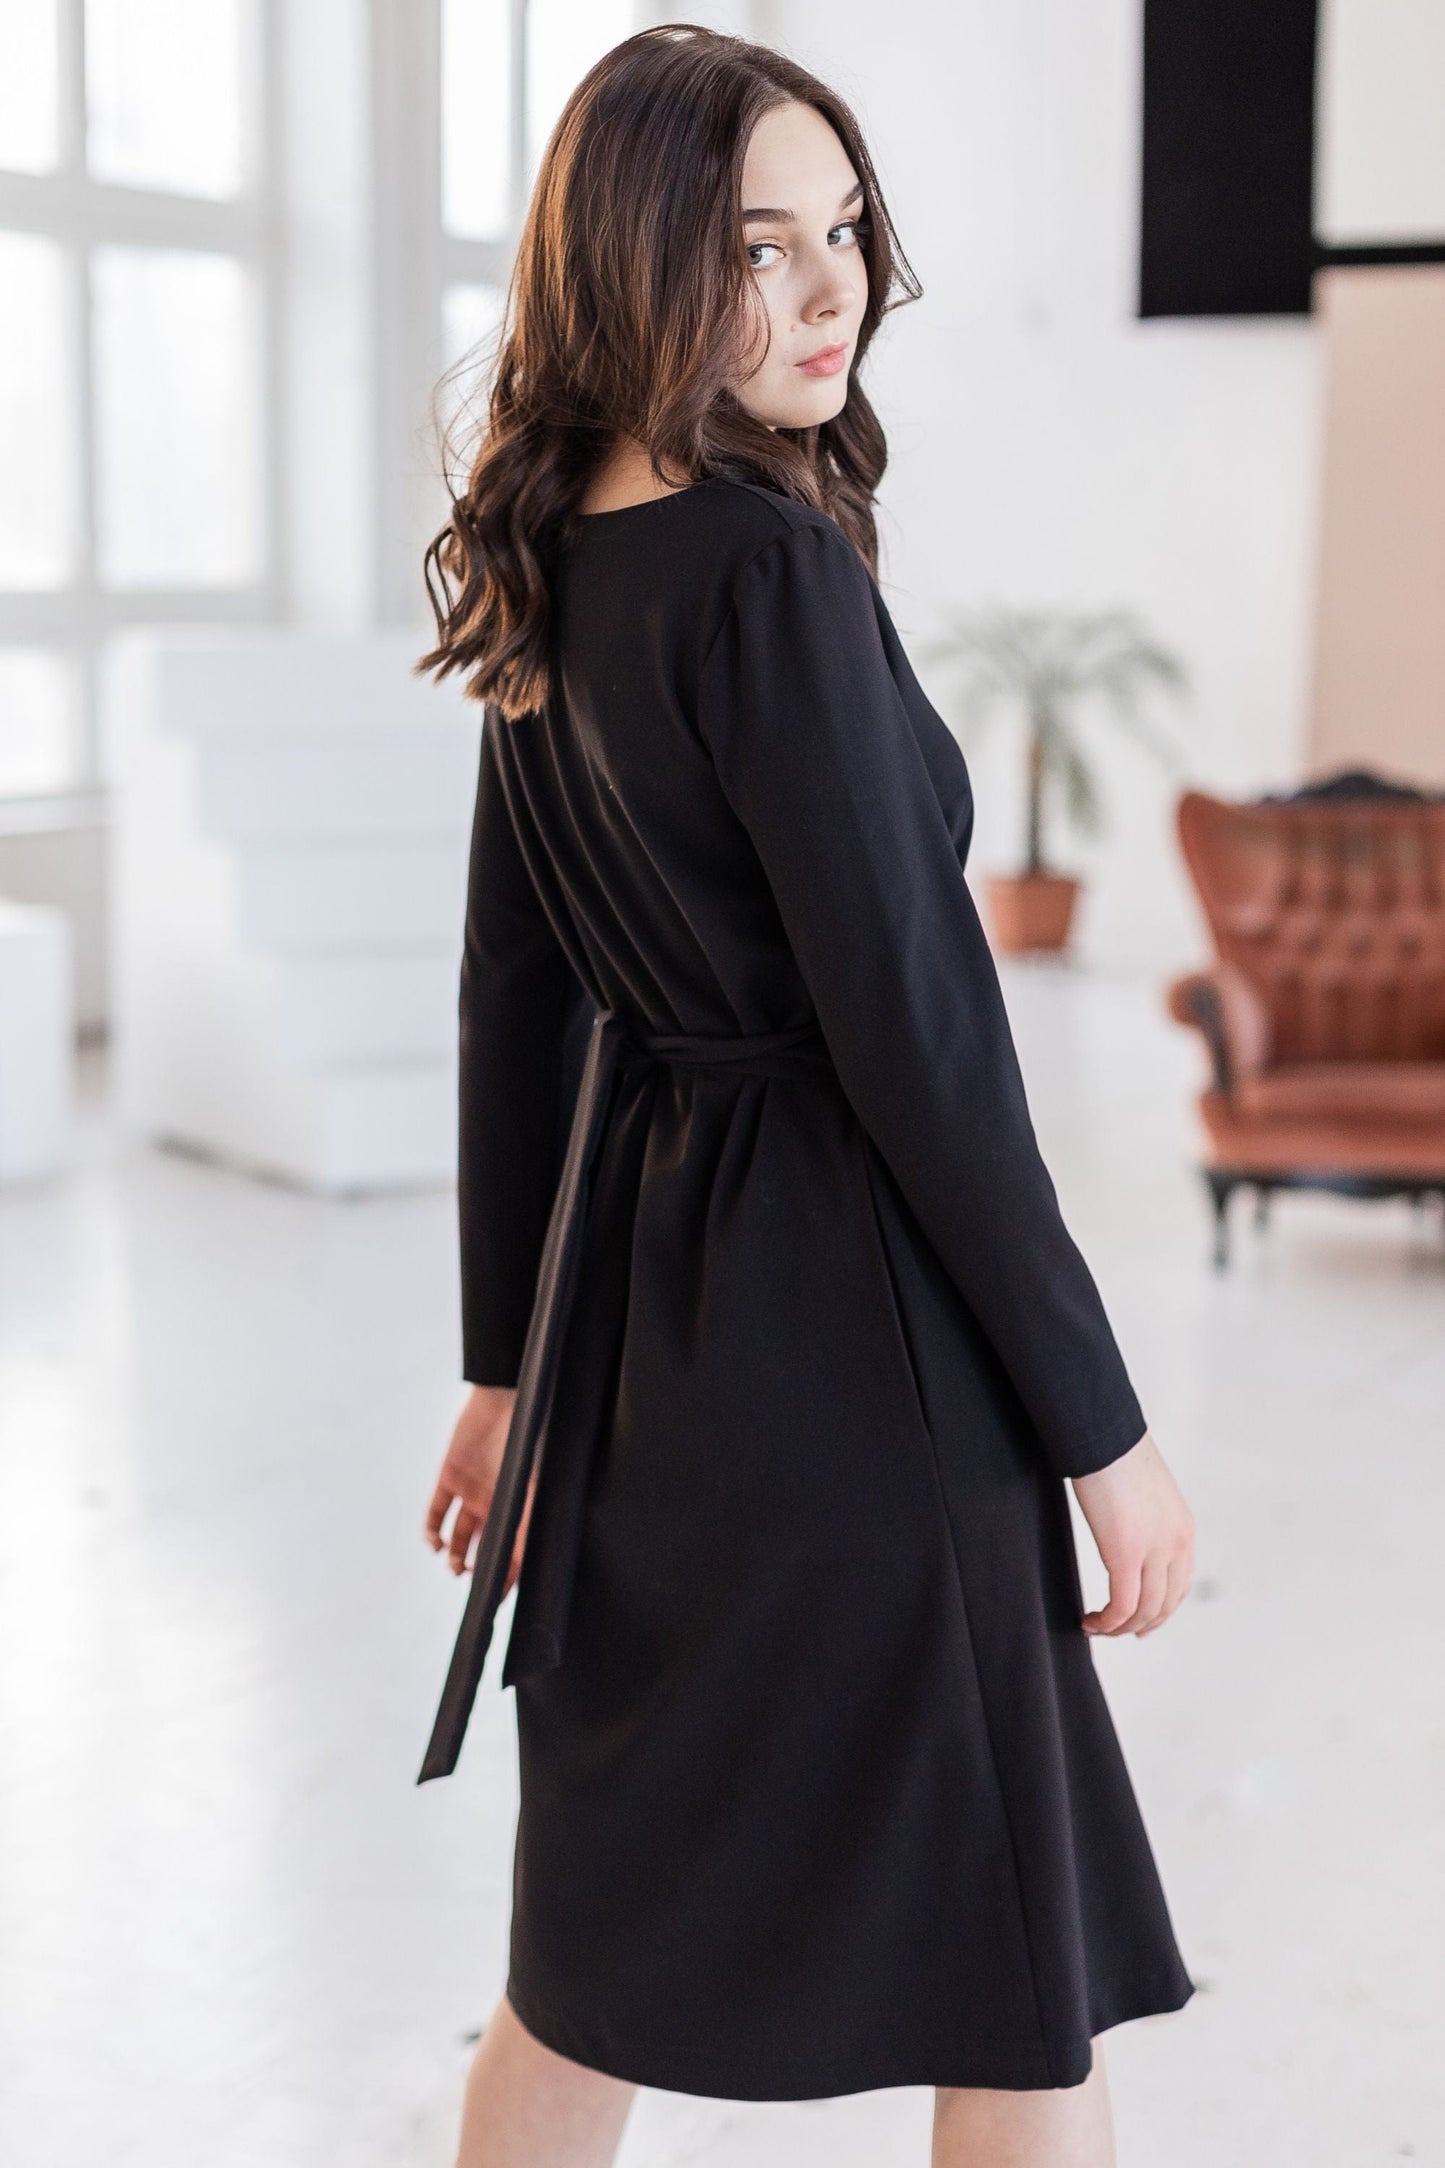 Black classic, loose-fitting dress with a belt